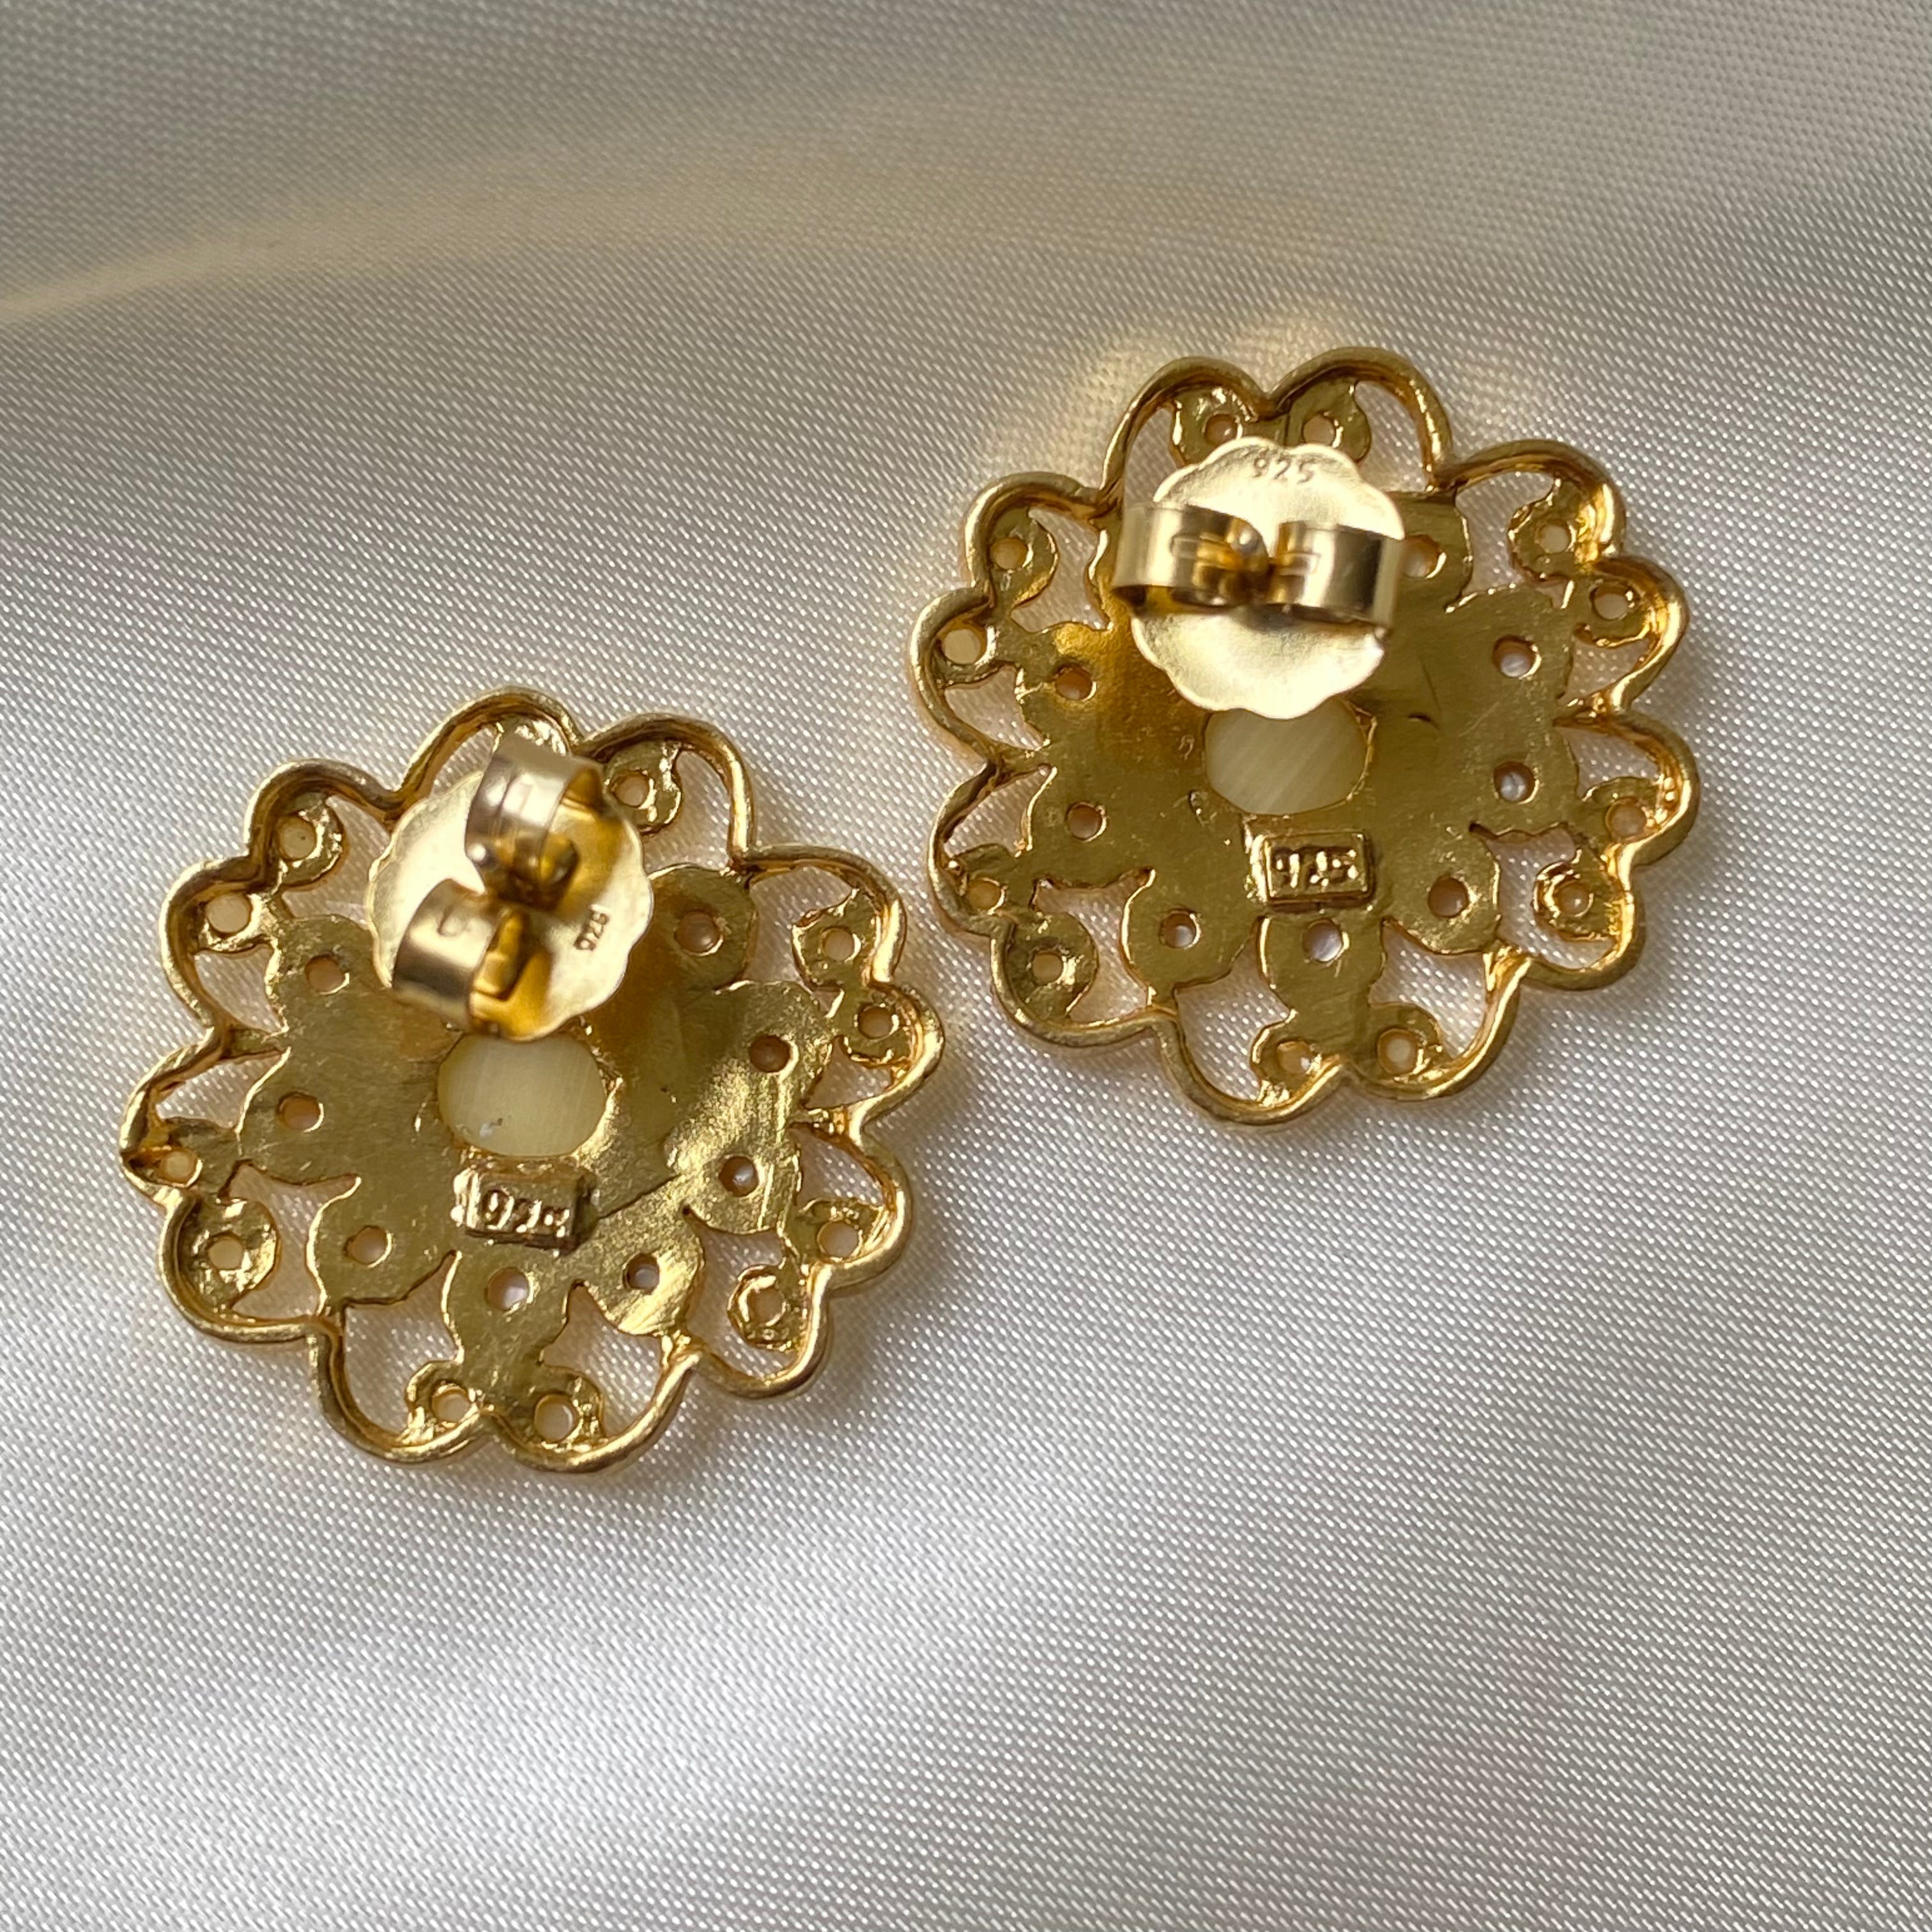 Sunlit Blossom Gem Studs - Pale yellow and Mother of Pearl